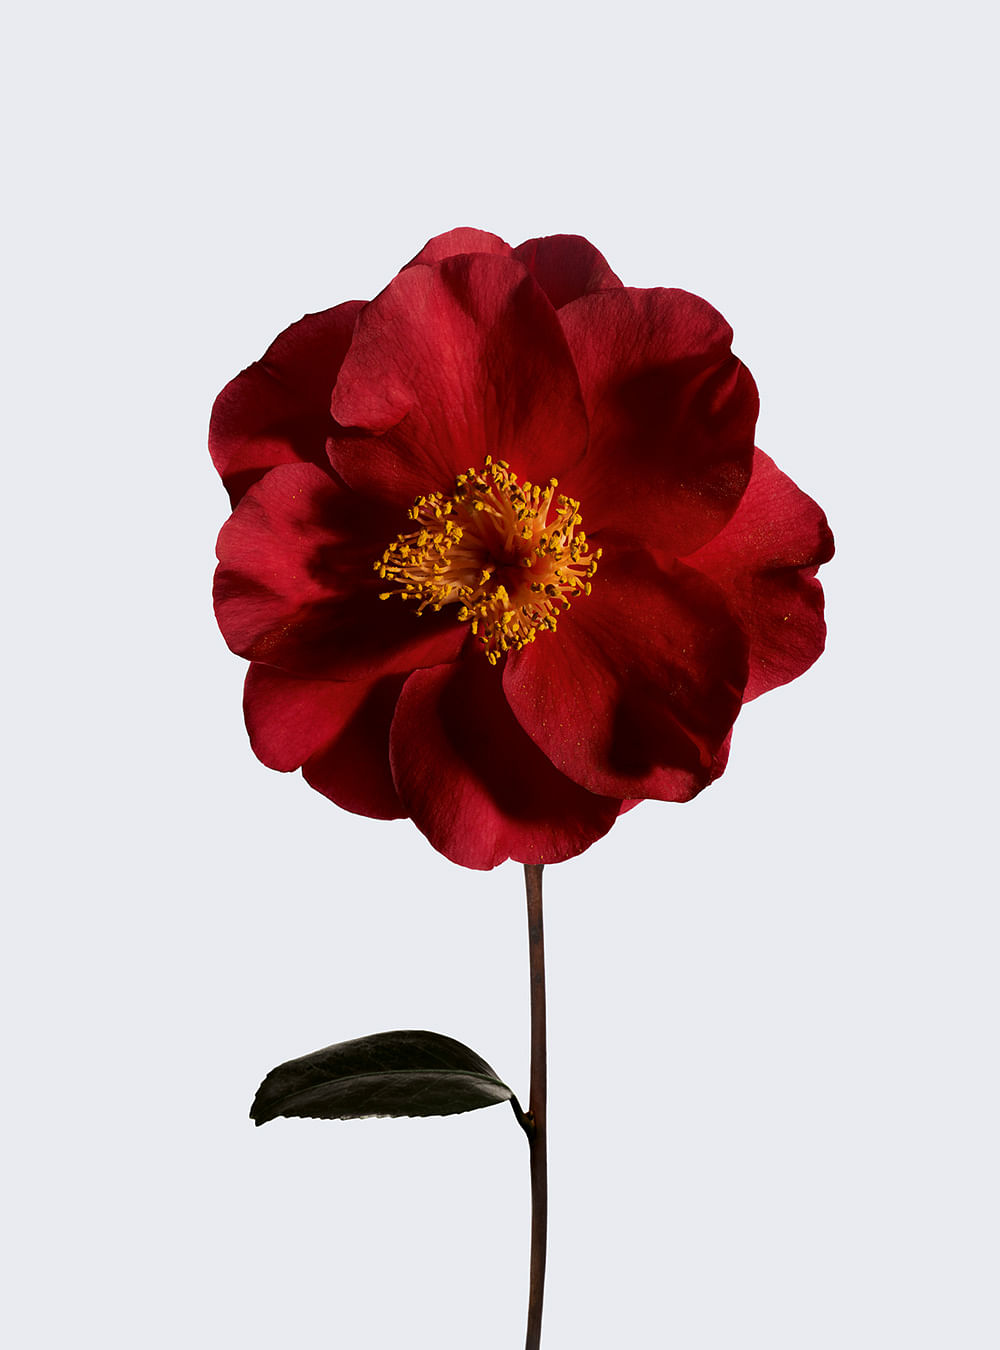 How The Red Camellia Became The Heart Of Nº1 De Chanel